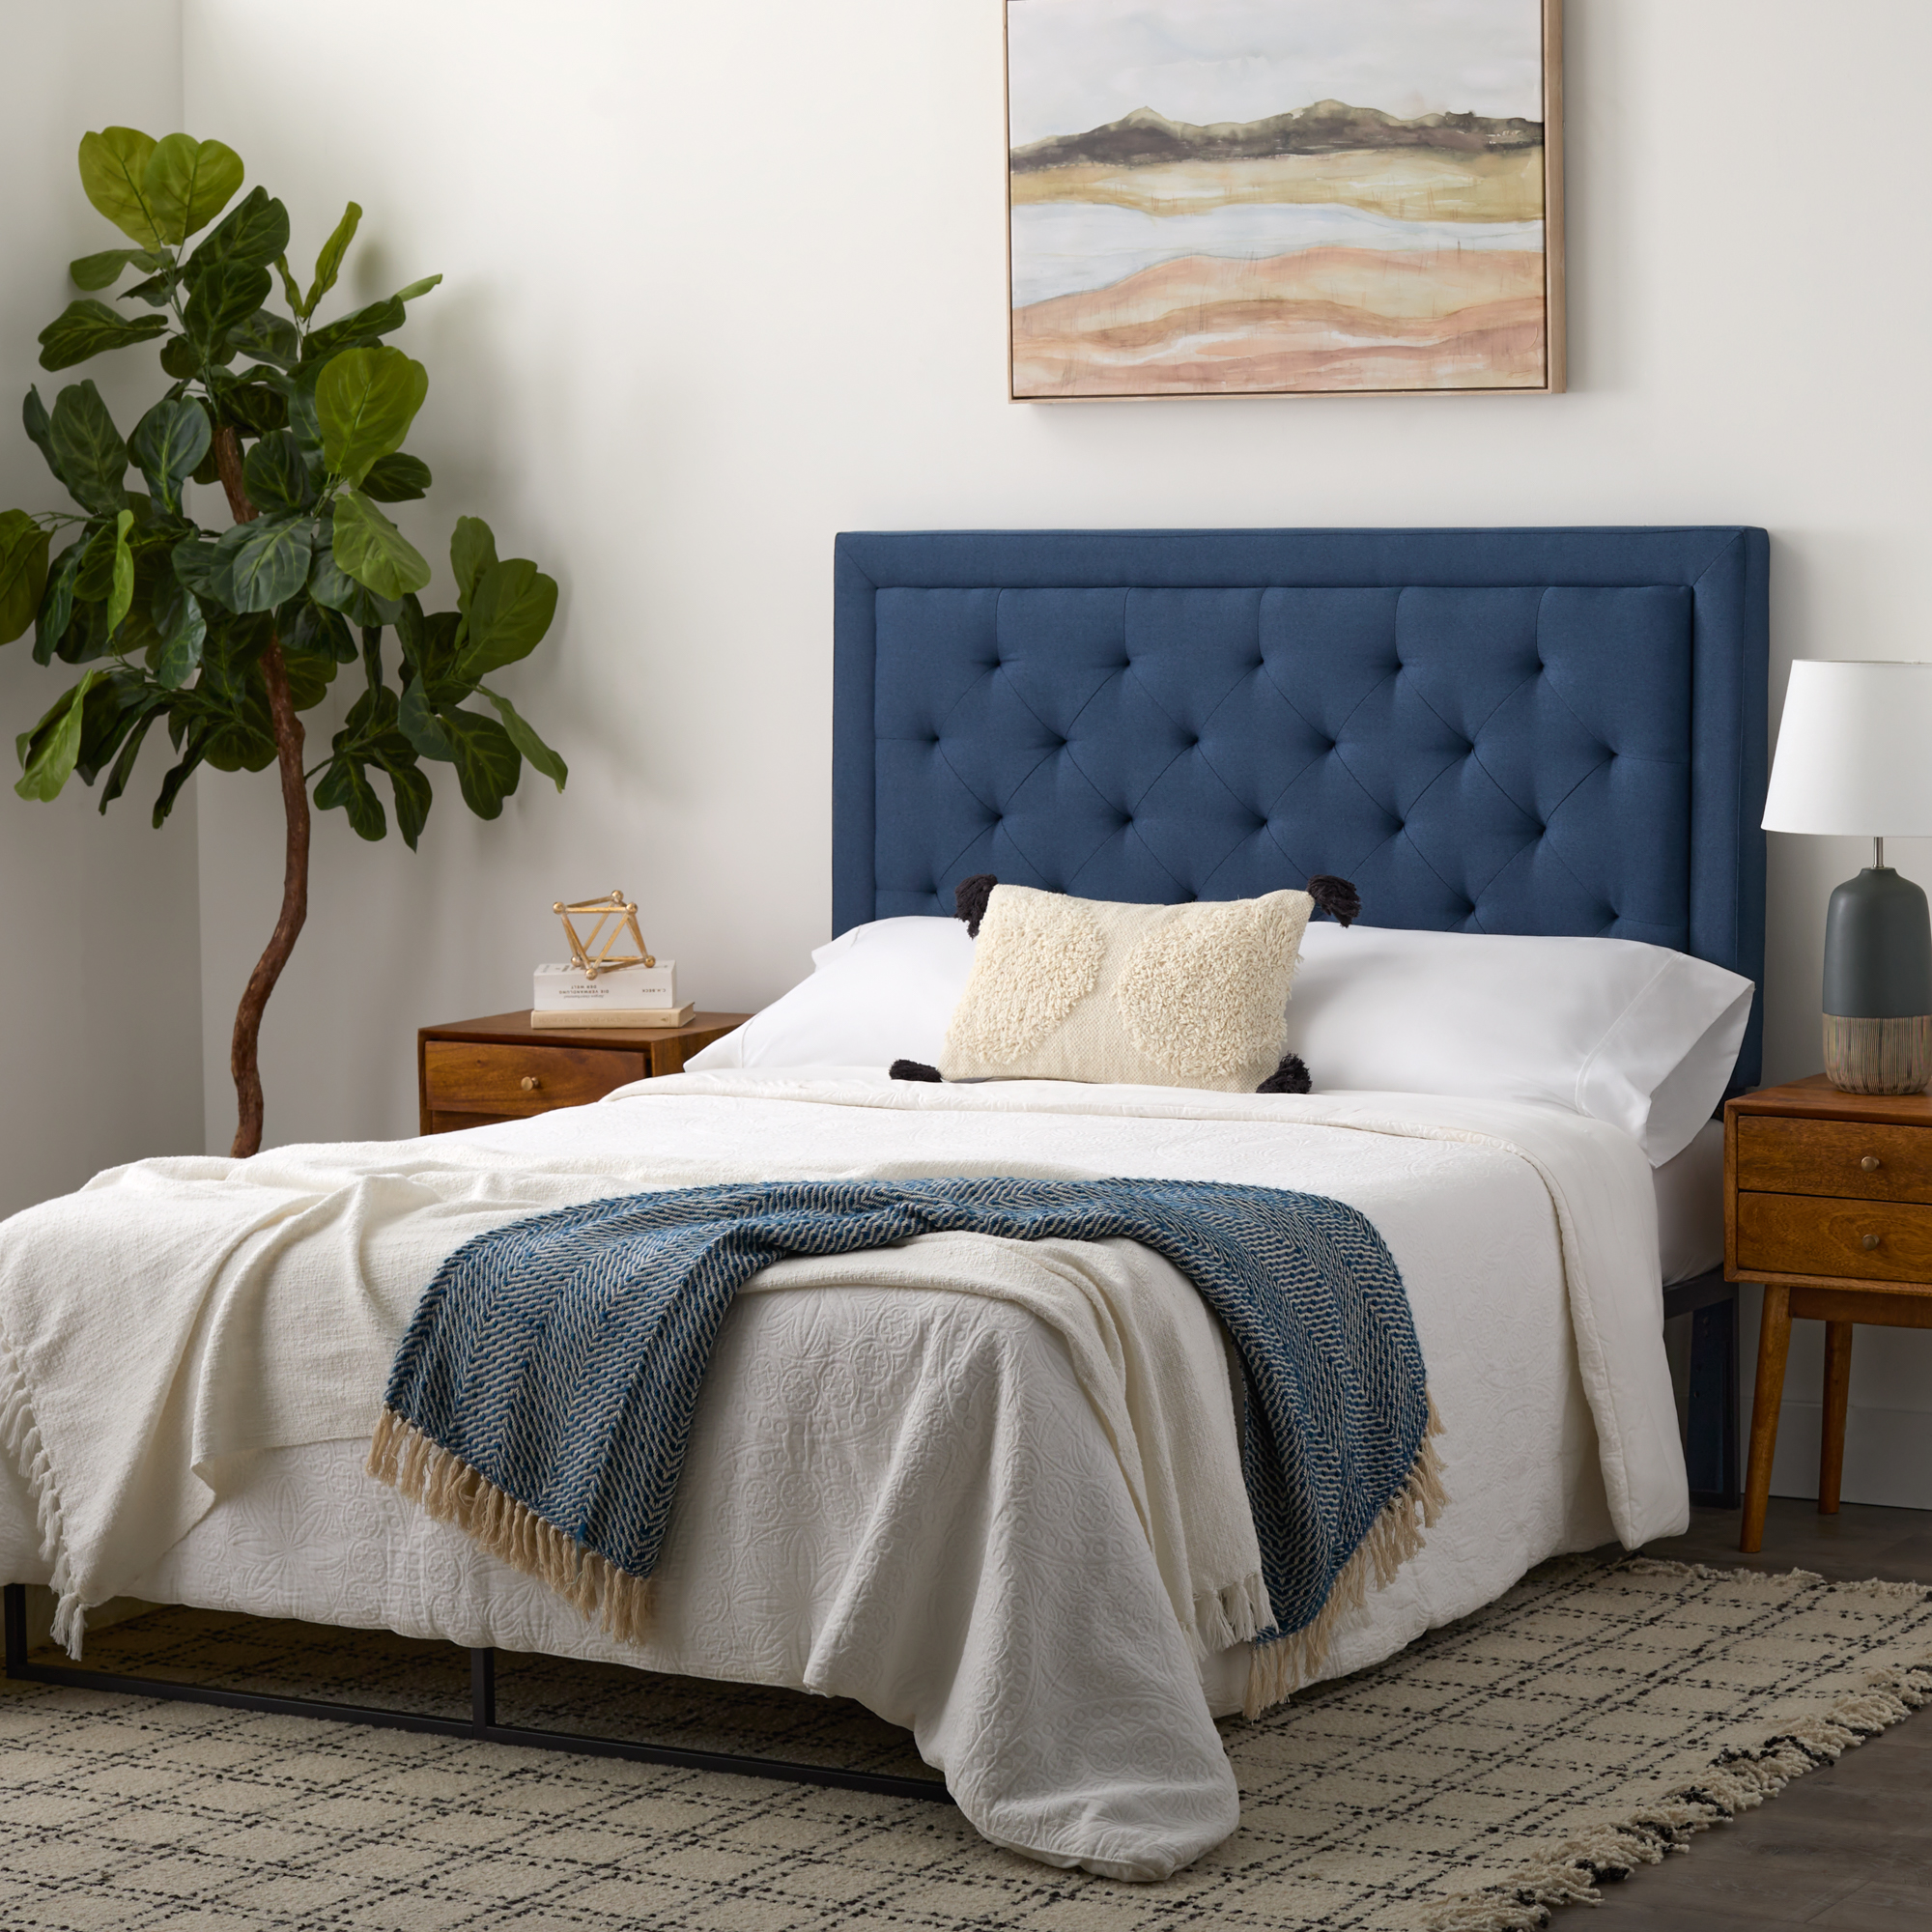 Rest Haven Medford Rectangle Upholstered Headboard with Diamond Tufting, Queen, Navy - image 3 of 11